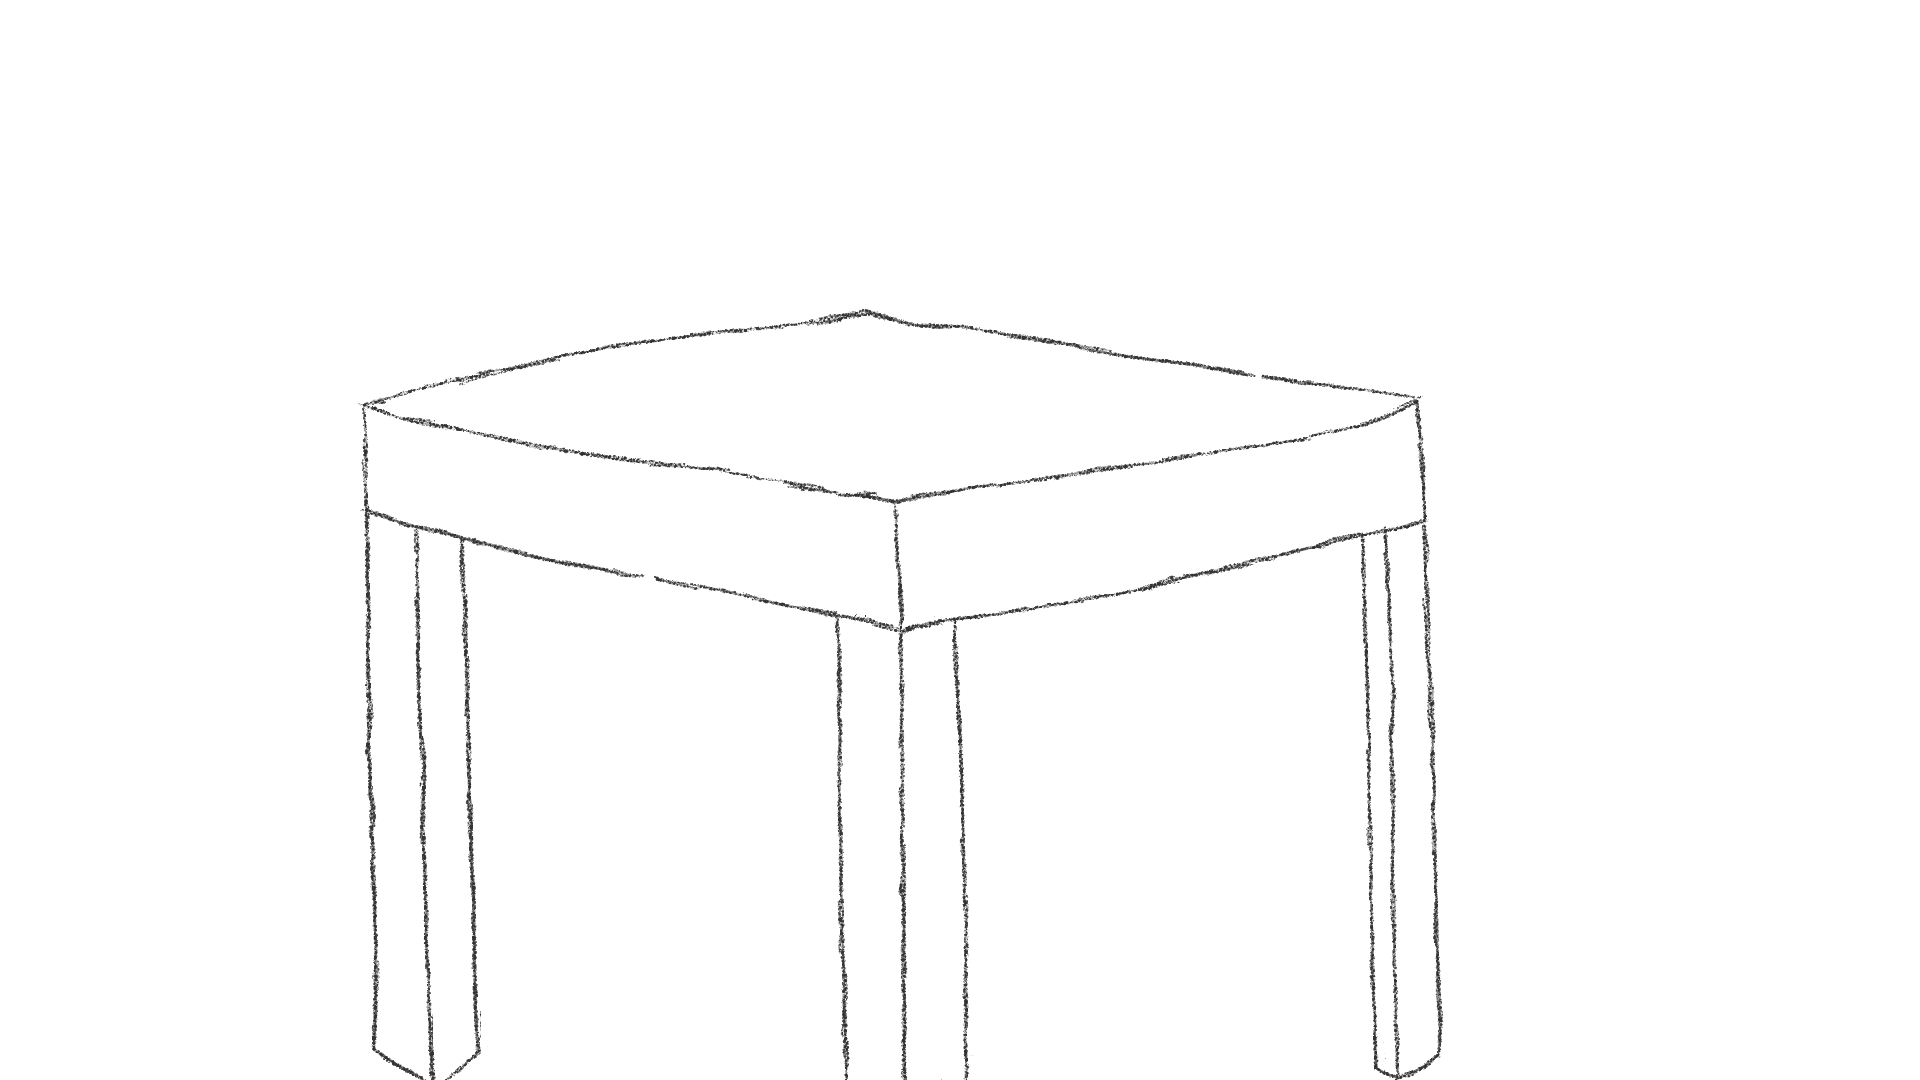 Pencil Drawing Of A Table